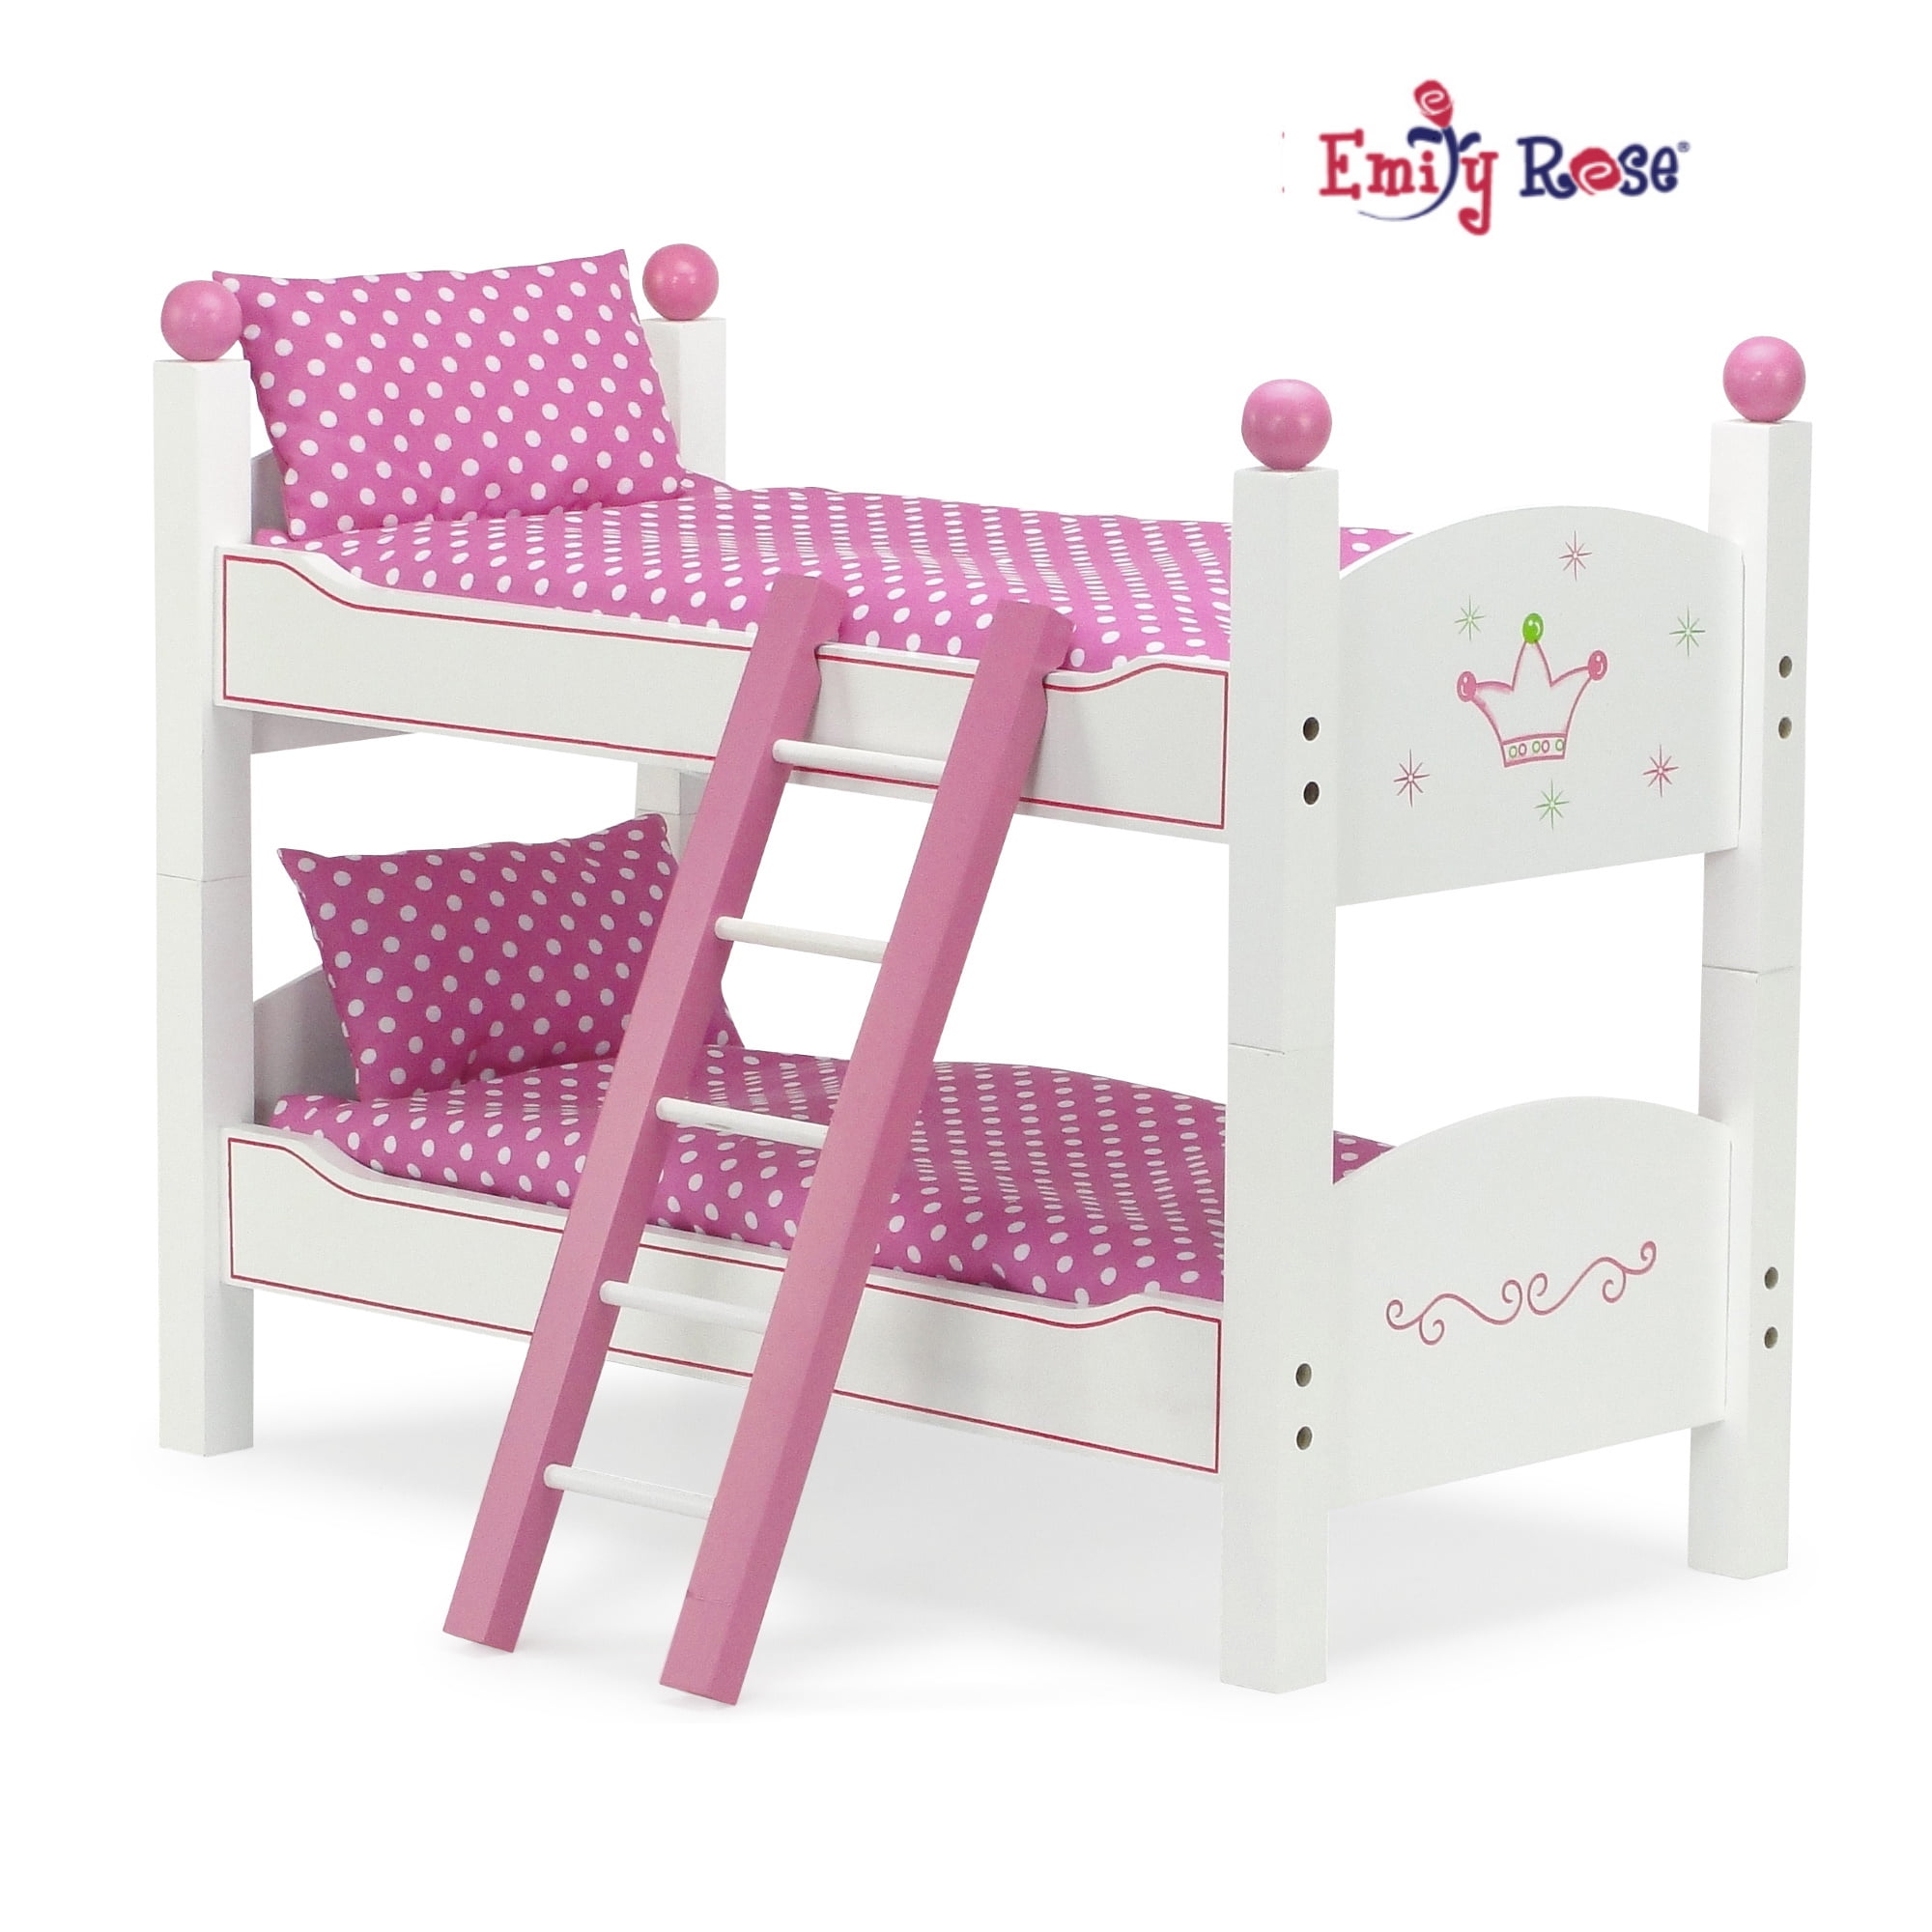 Emily Rose 18 Inch Doll Bunk Bed, How To Make A 18 Inch Doll Bunk Bed